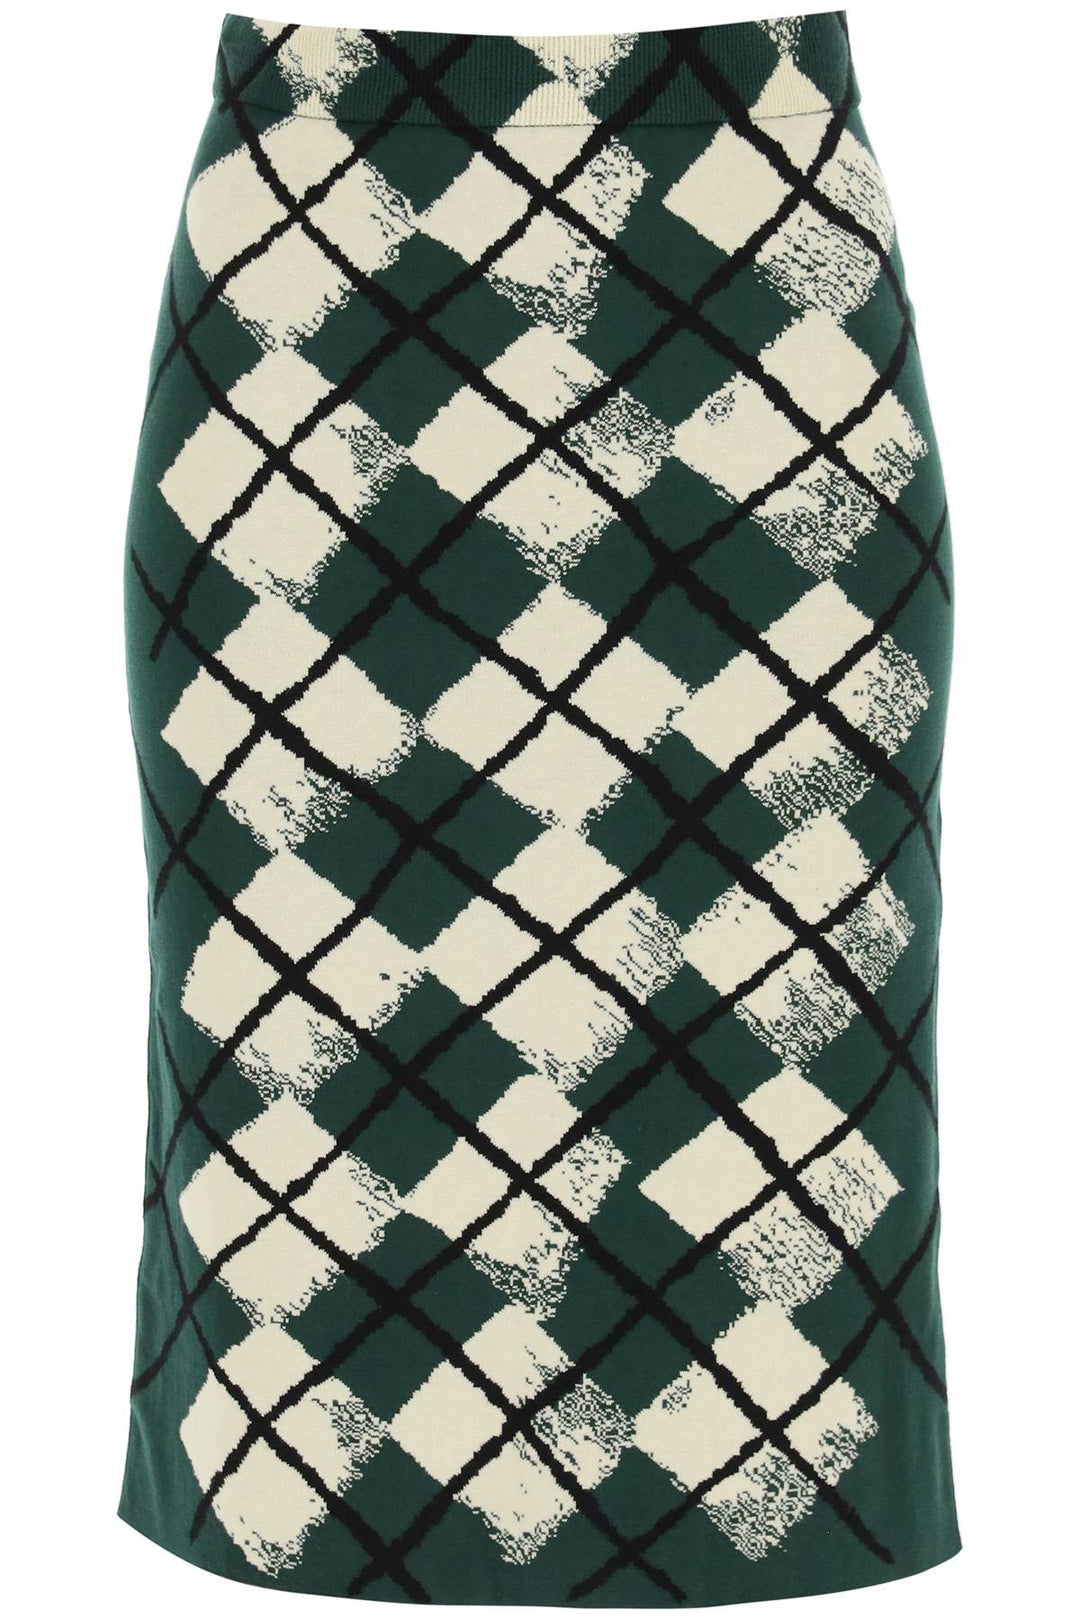 Burberry Replace With Double Quoteknitted Diamond Pattern Midi Skirt   Verde